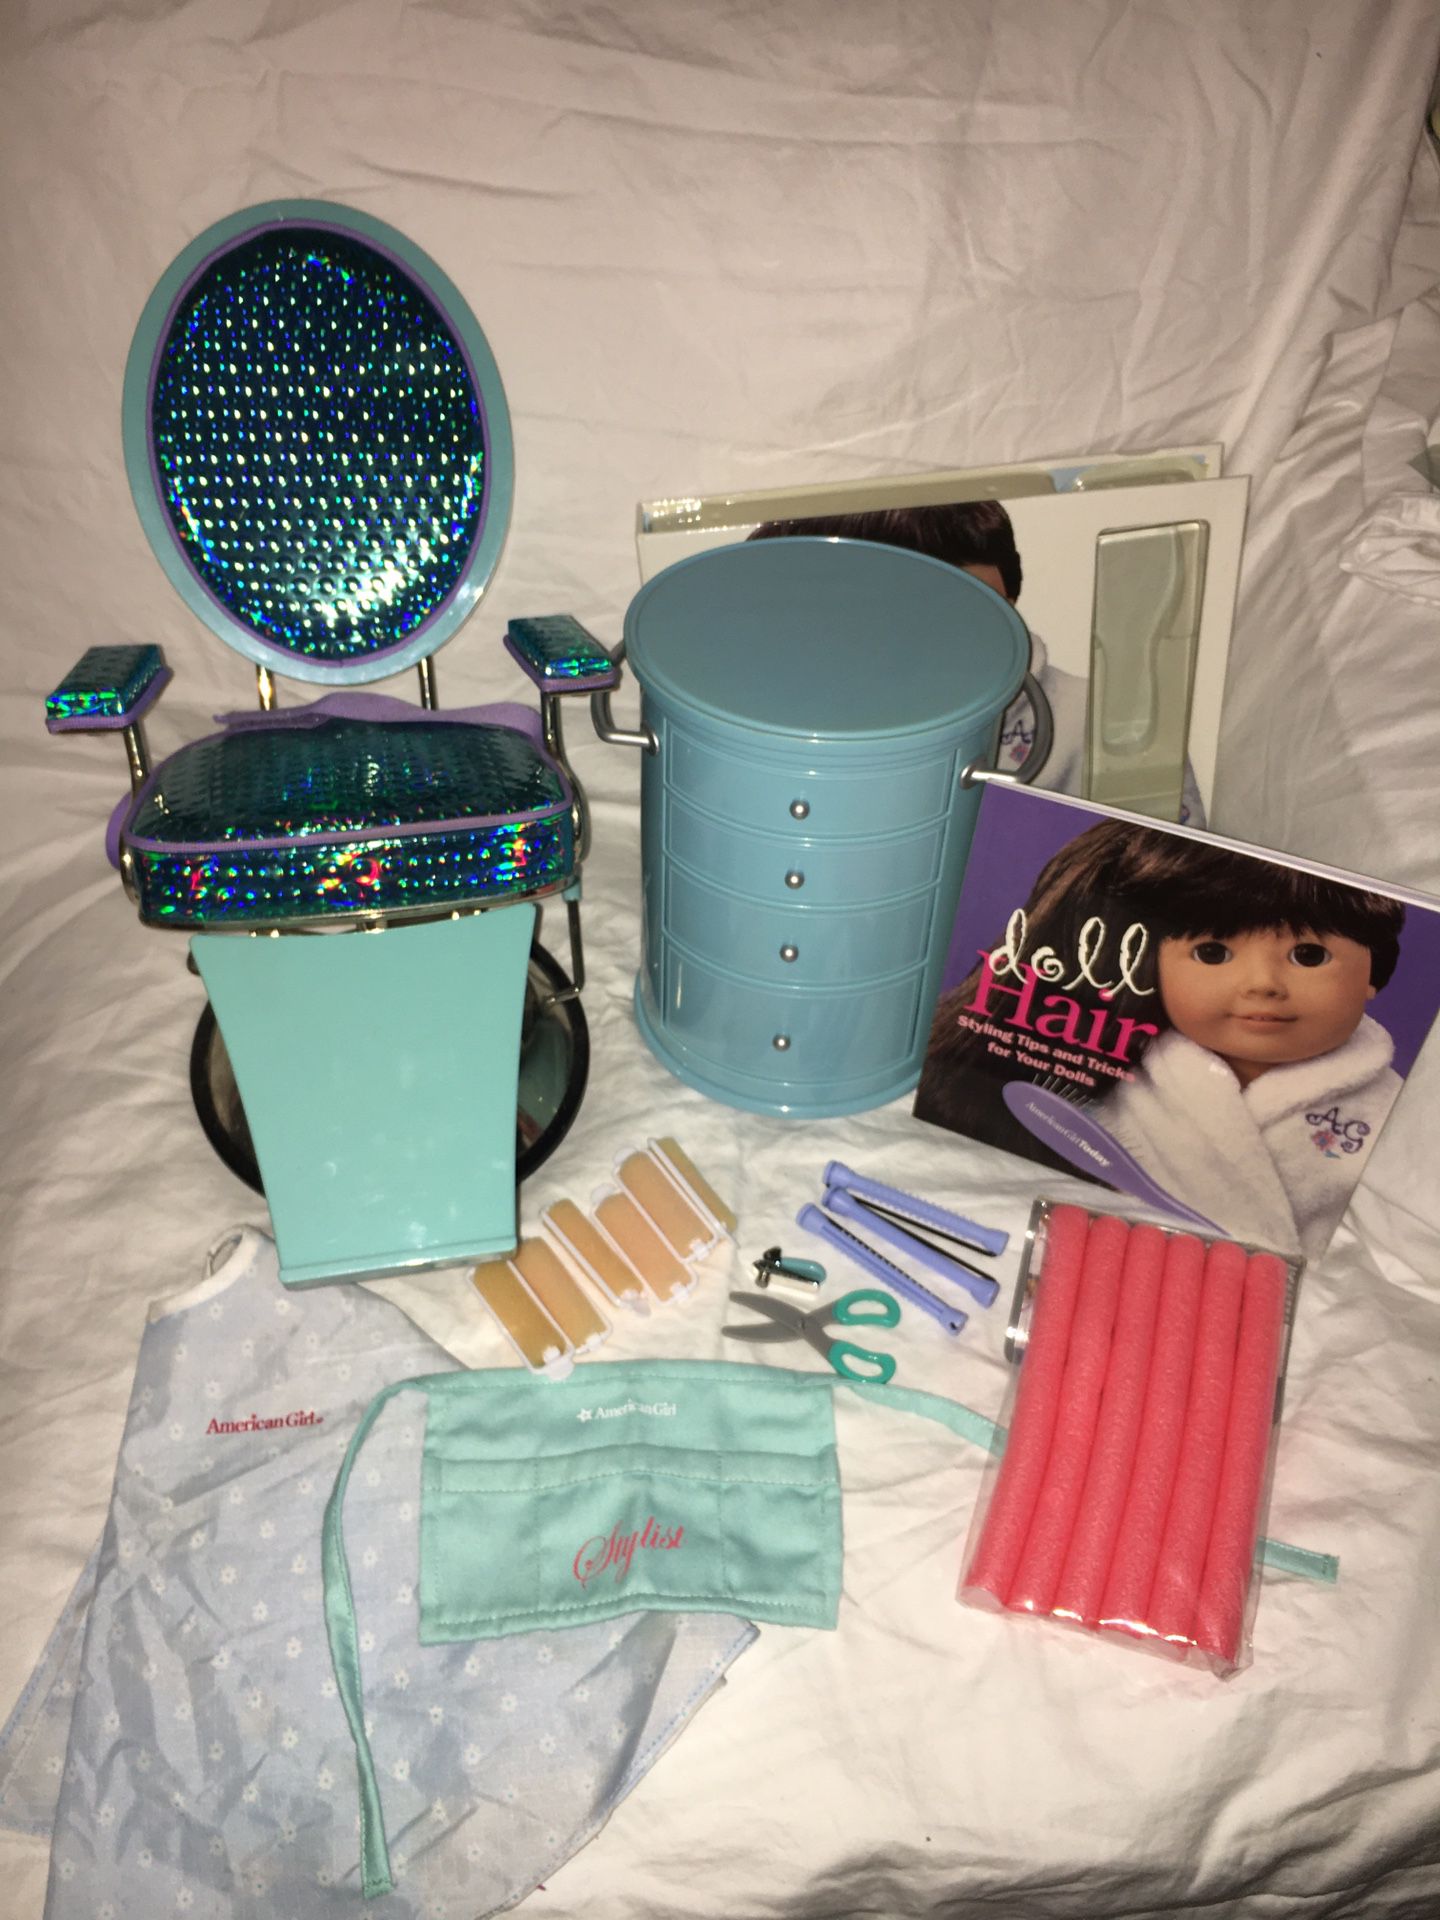 American Girl Doll Salon Chair, Caddy, and Accessories